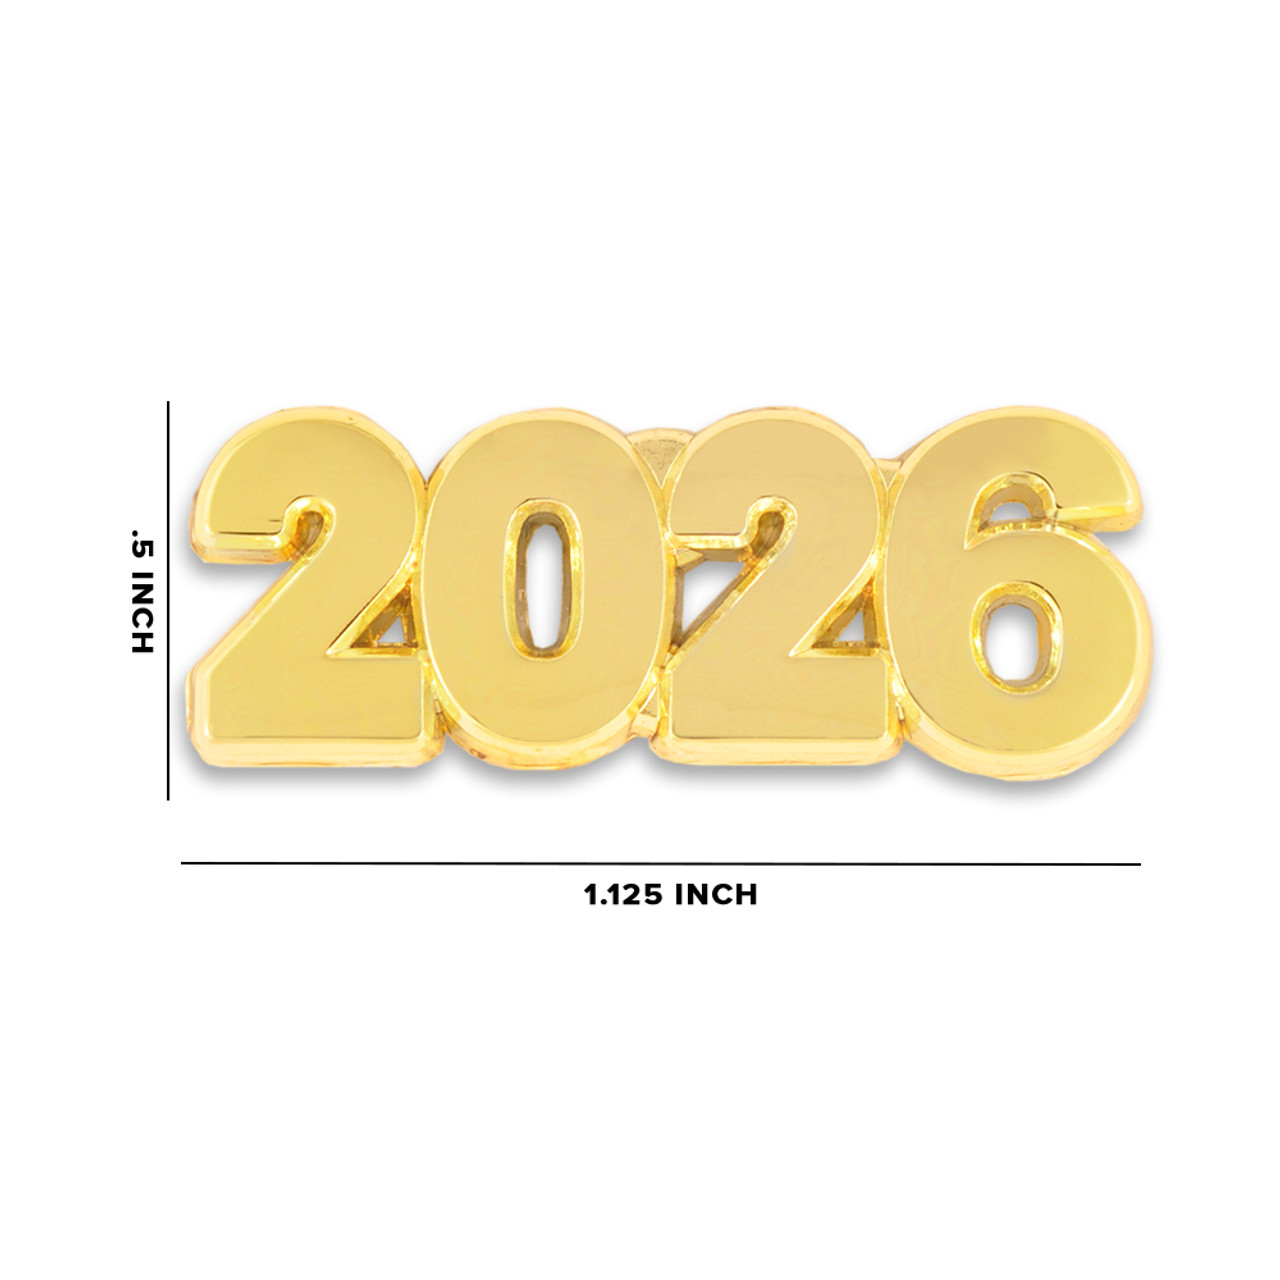 2025 Year Lapel Pin | Multi Color | School Pins by PinMart